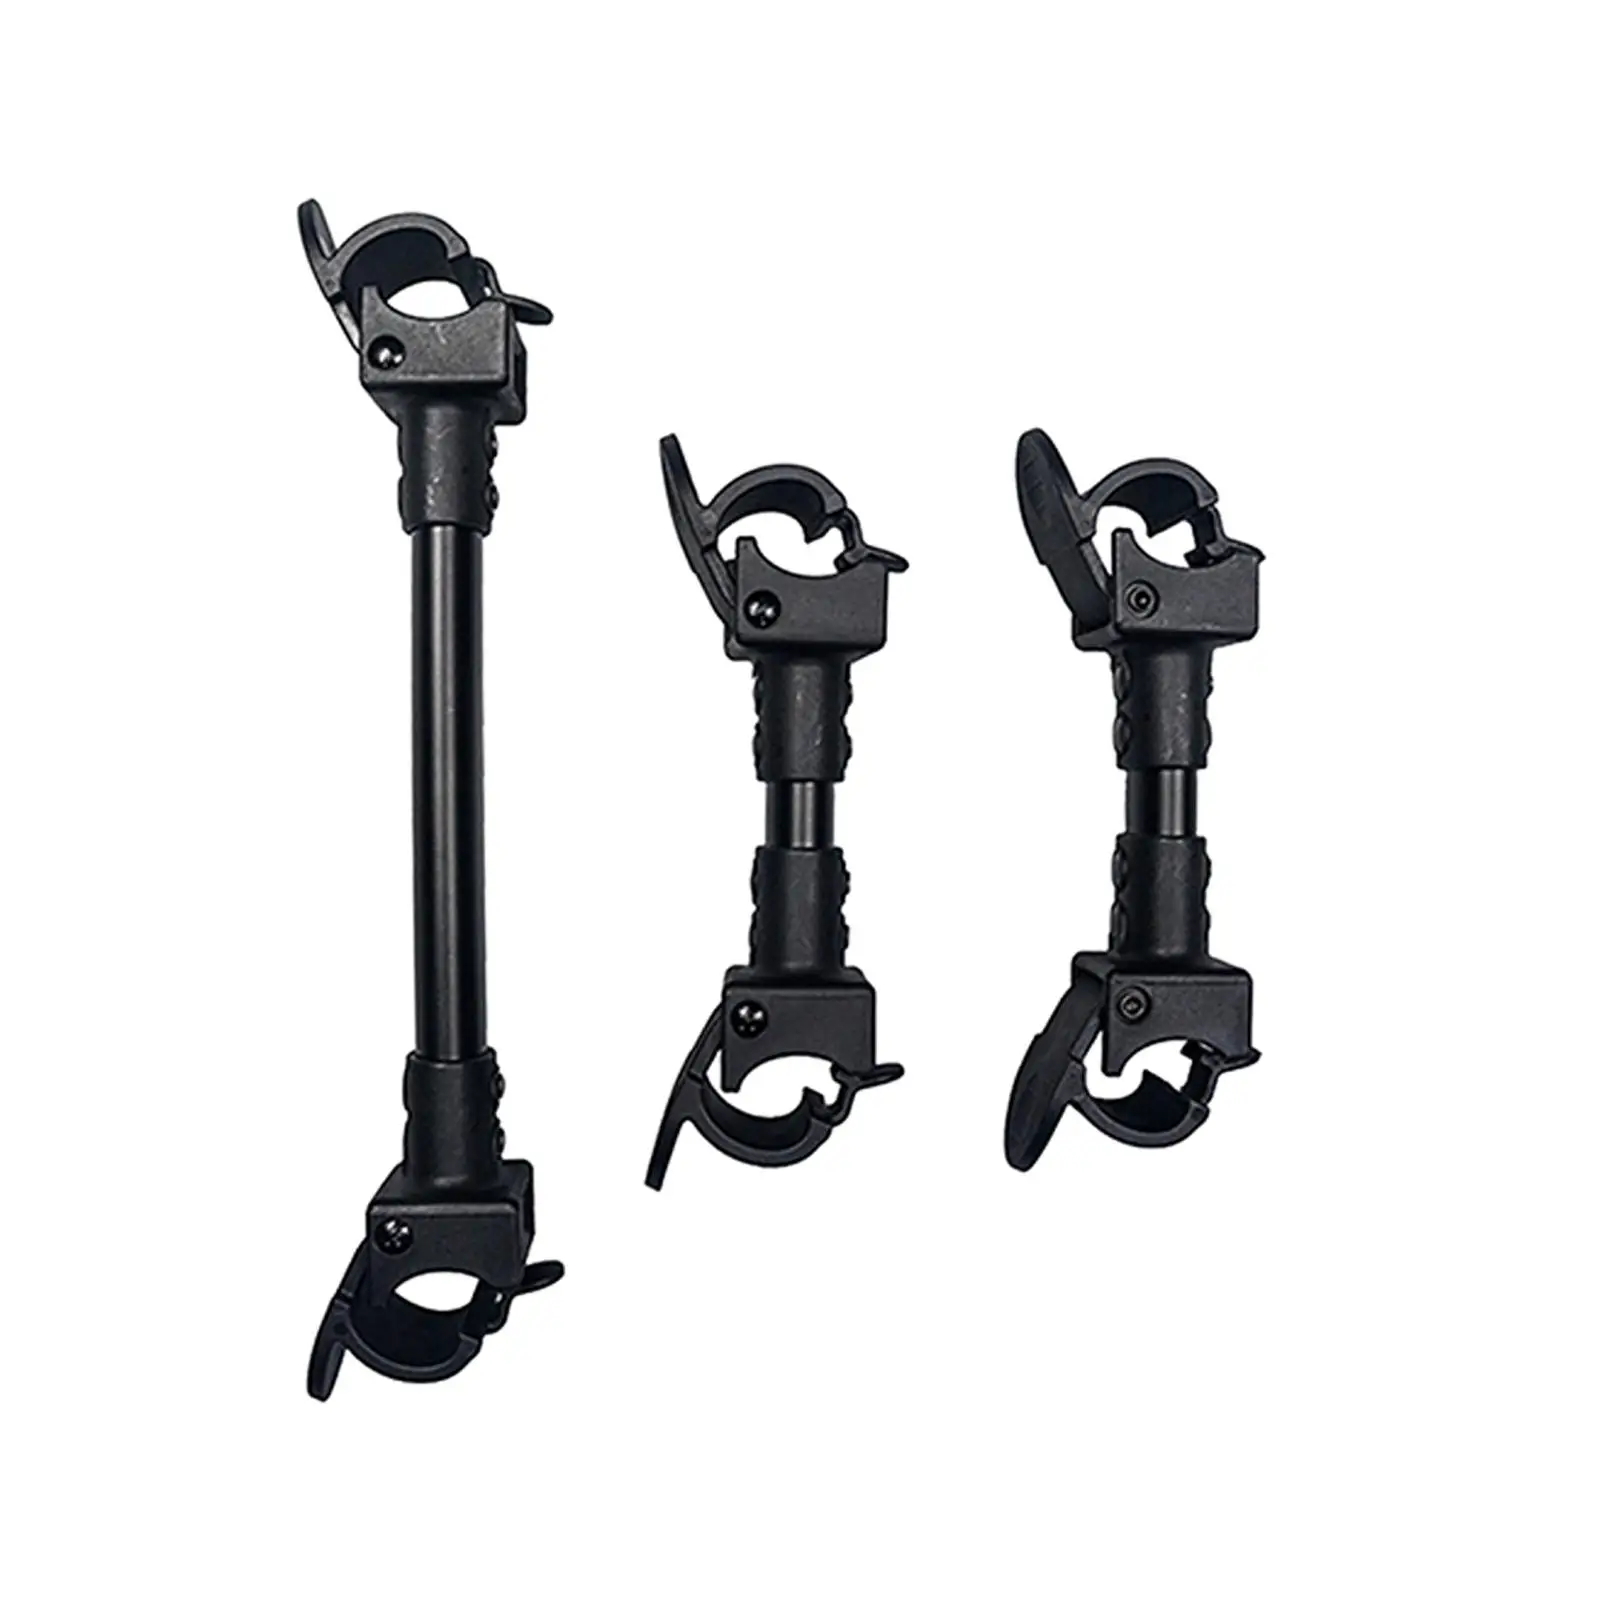 

3 Pieces Stroller Connector Universal Joints Secure Strap Linker for Babyzen Cart